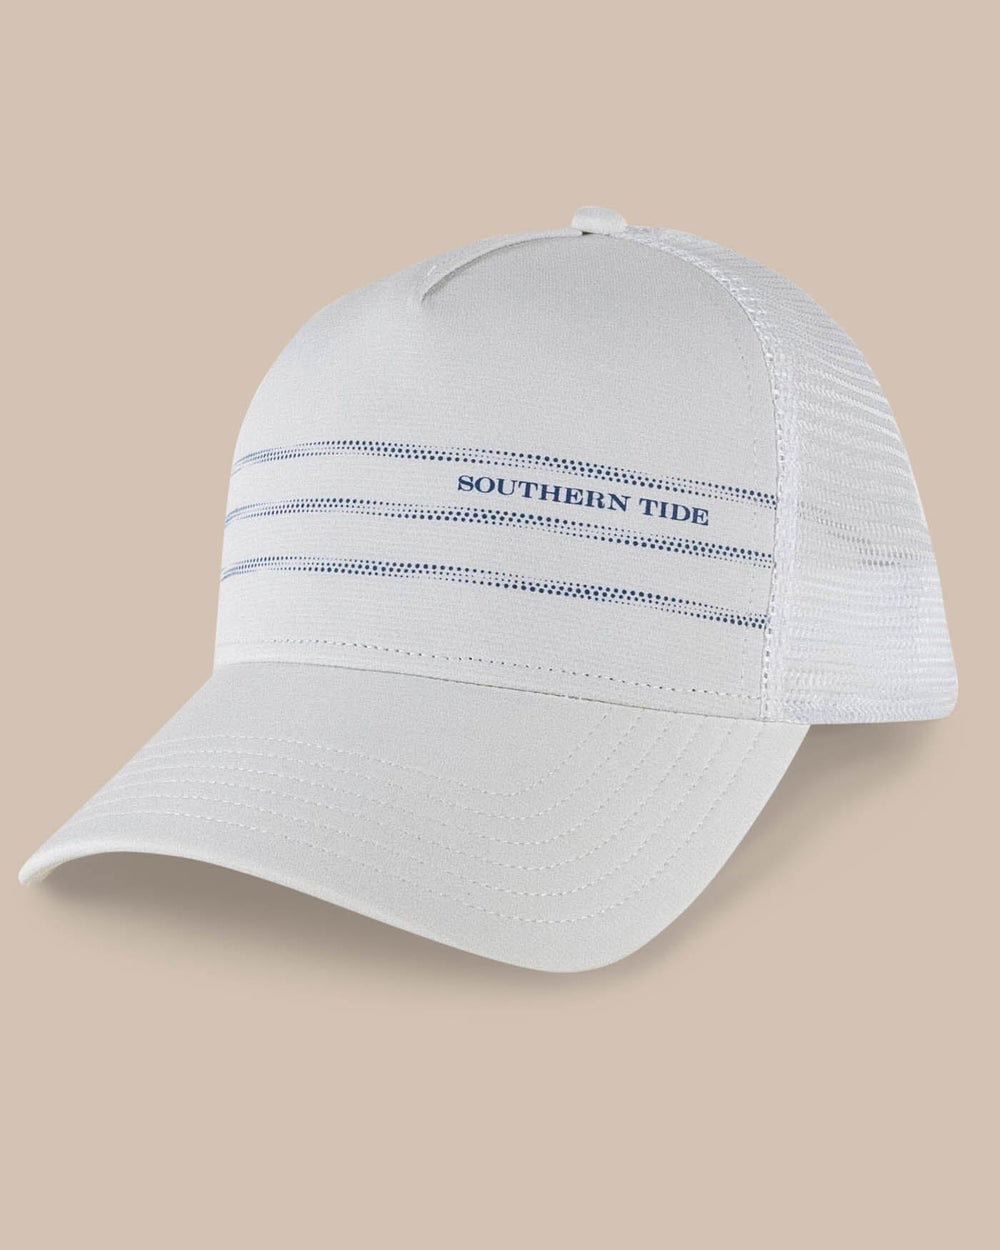 The front view of the Southern Tide ST Performance Print Trucker by Southern Tide - White